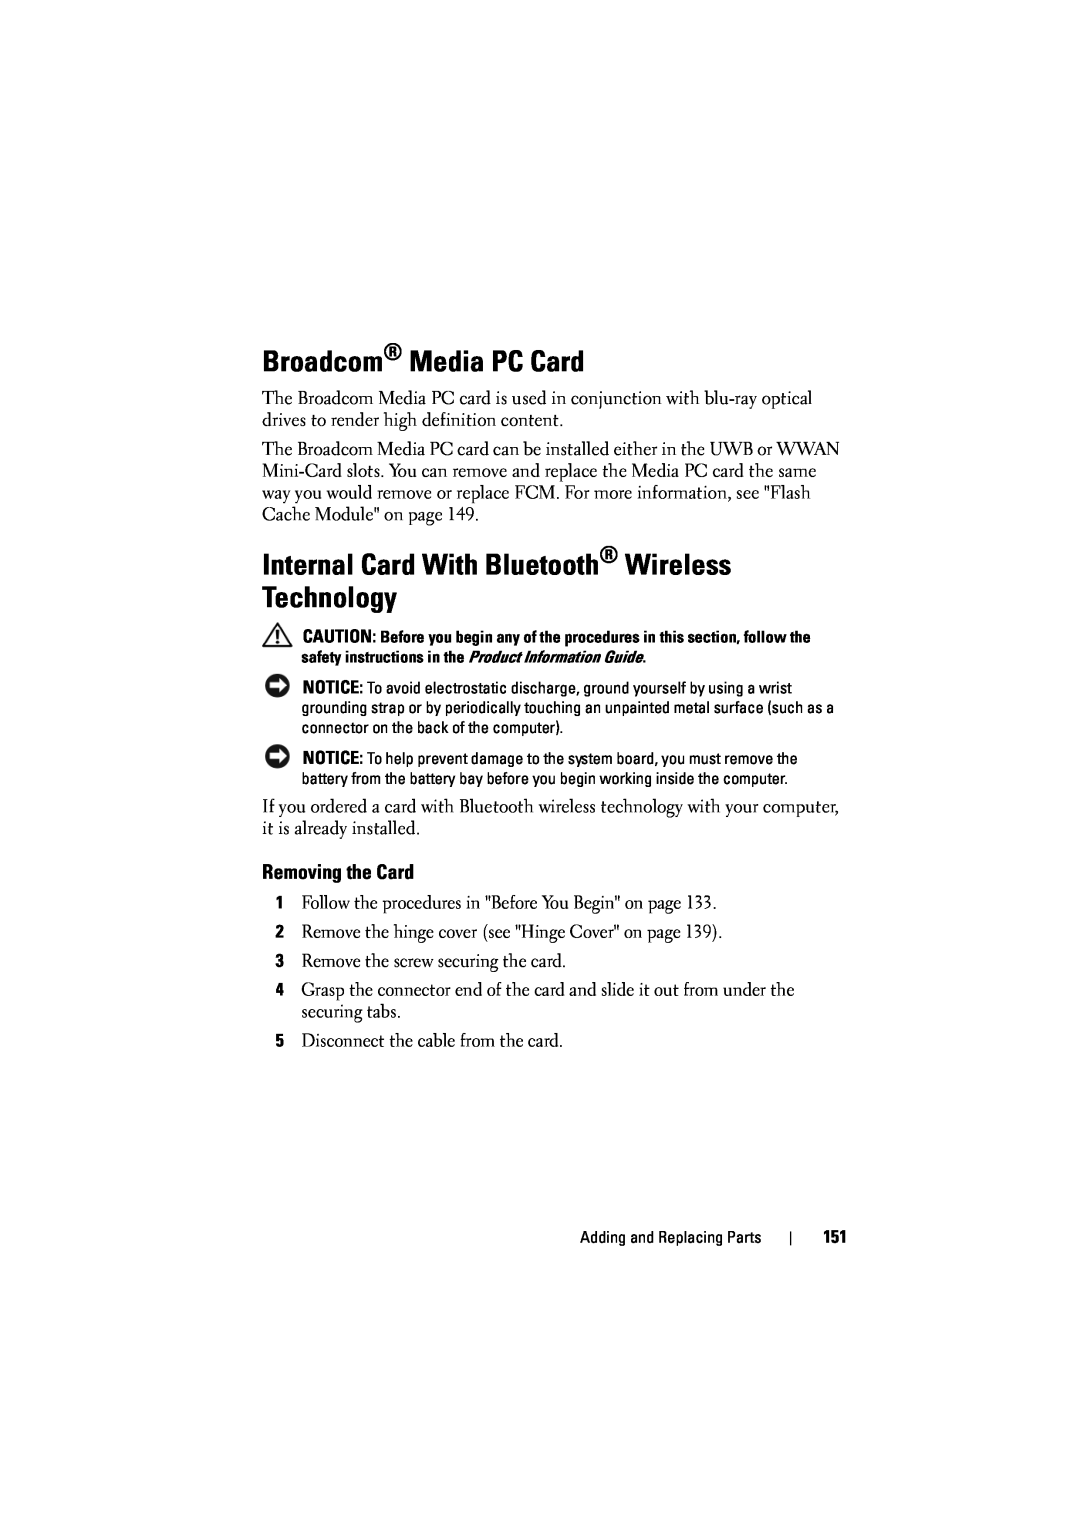 Dell 1526, 1525 owner manual Broadcom Media PC Card, Internal Card With Bluetooth Wireless Technology, Removing the Card 